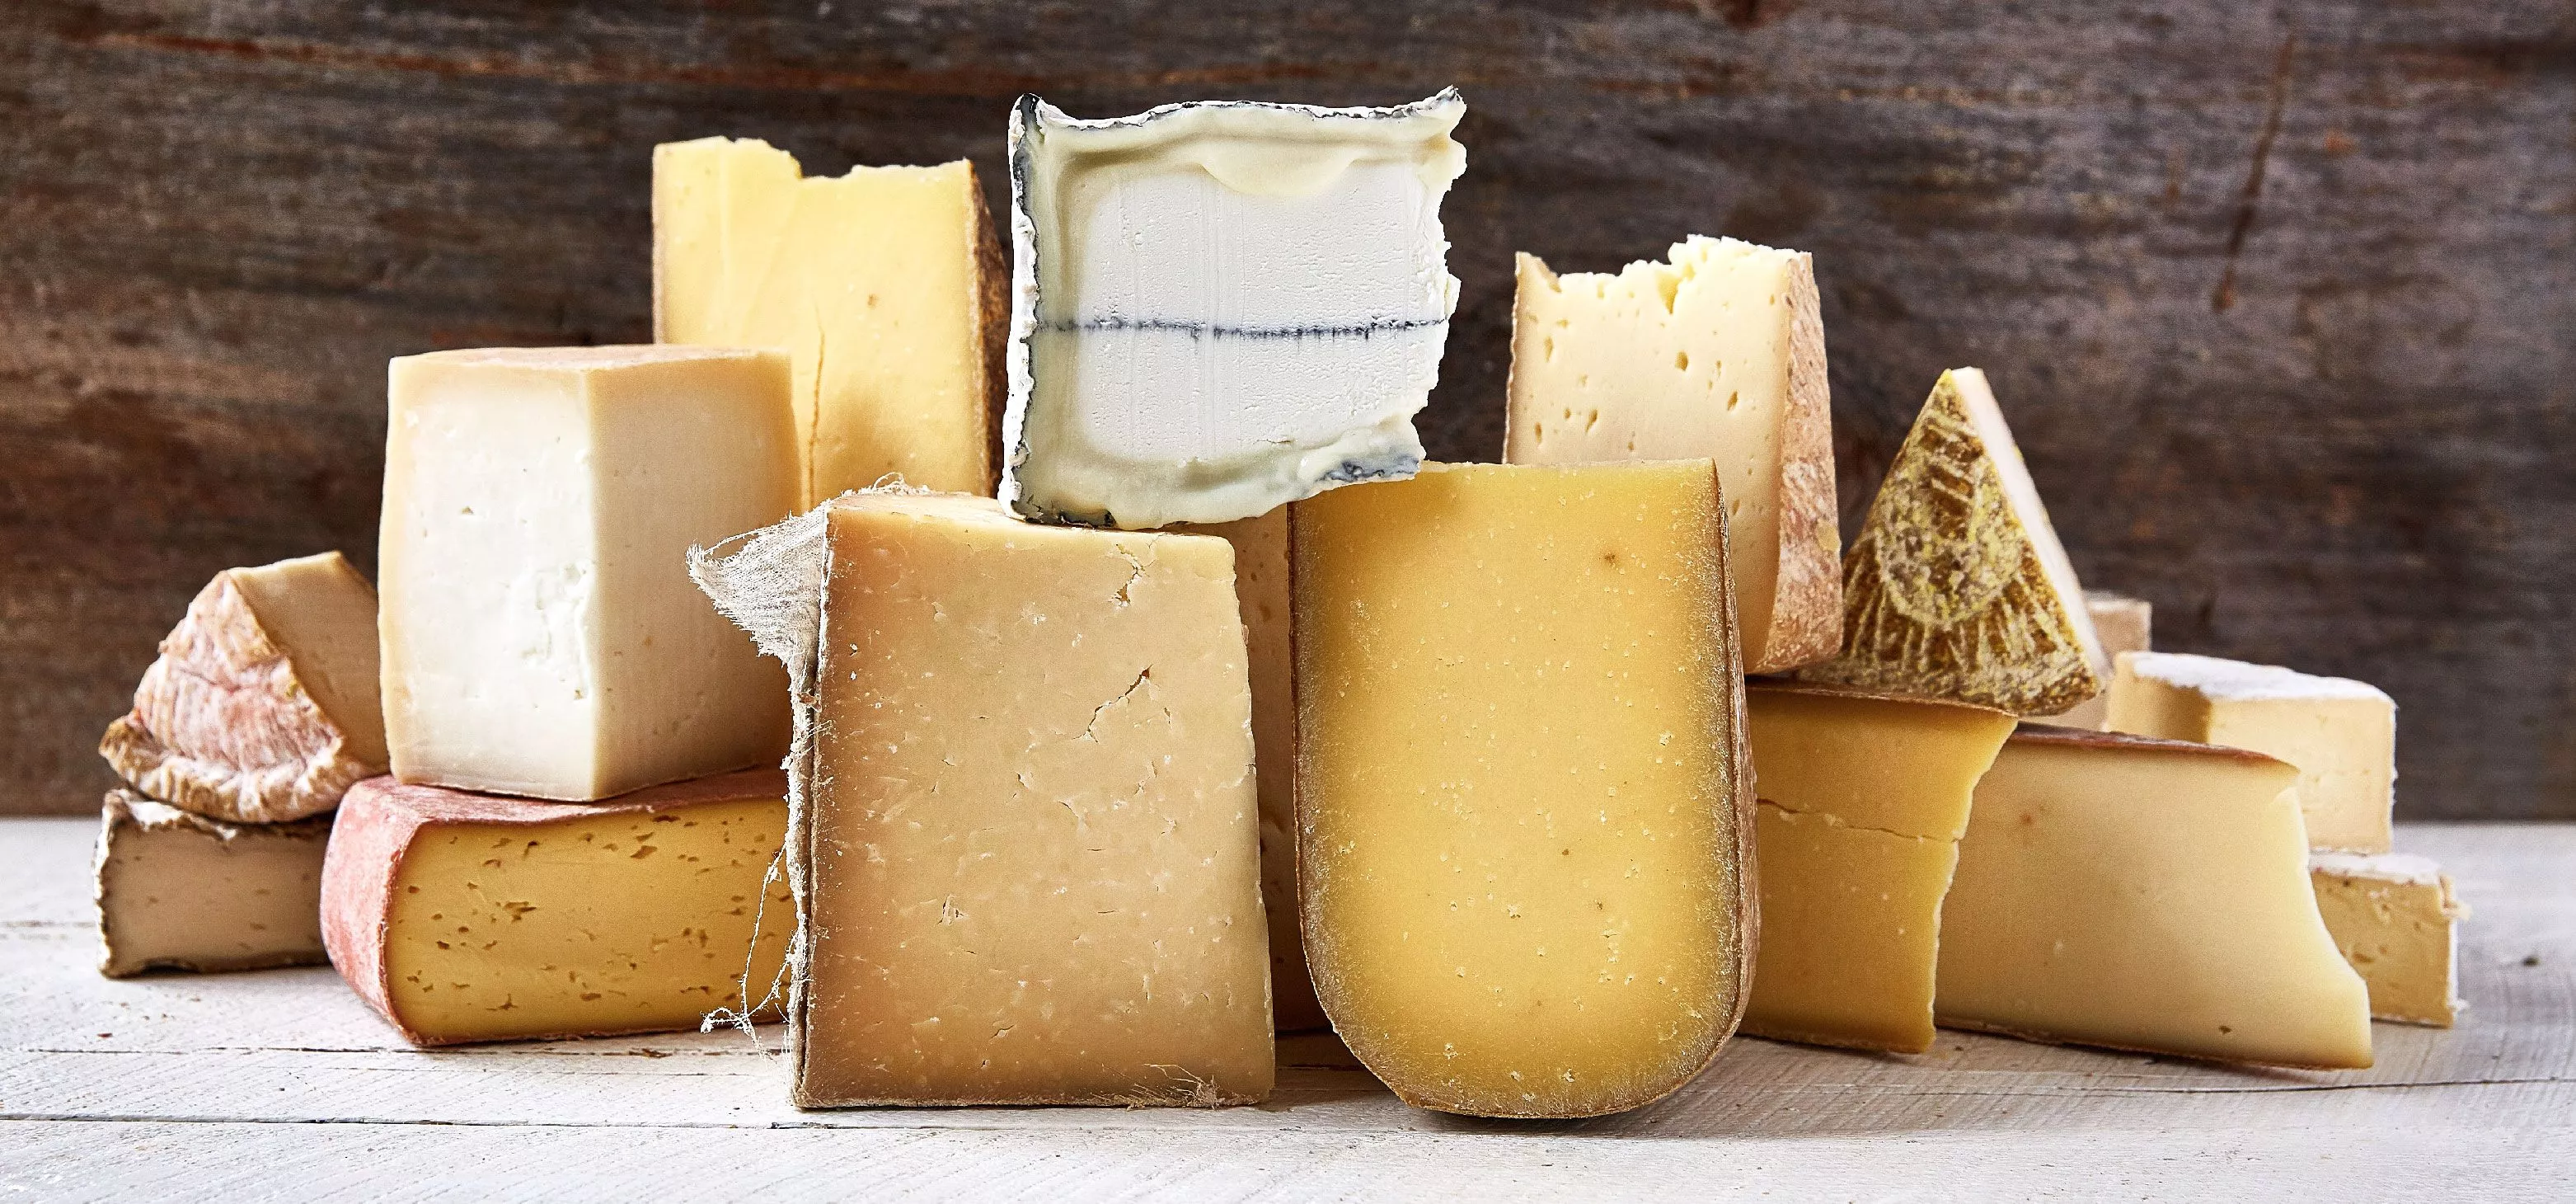 Simonehoeve in Netherlands, Europe | Cheesemakers - Rated 4.9